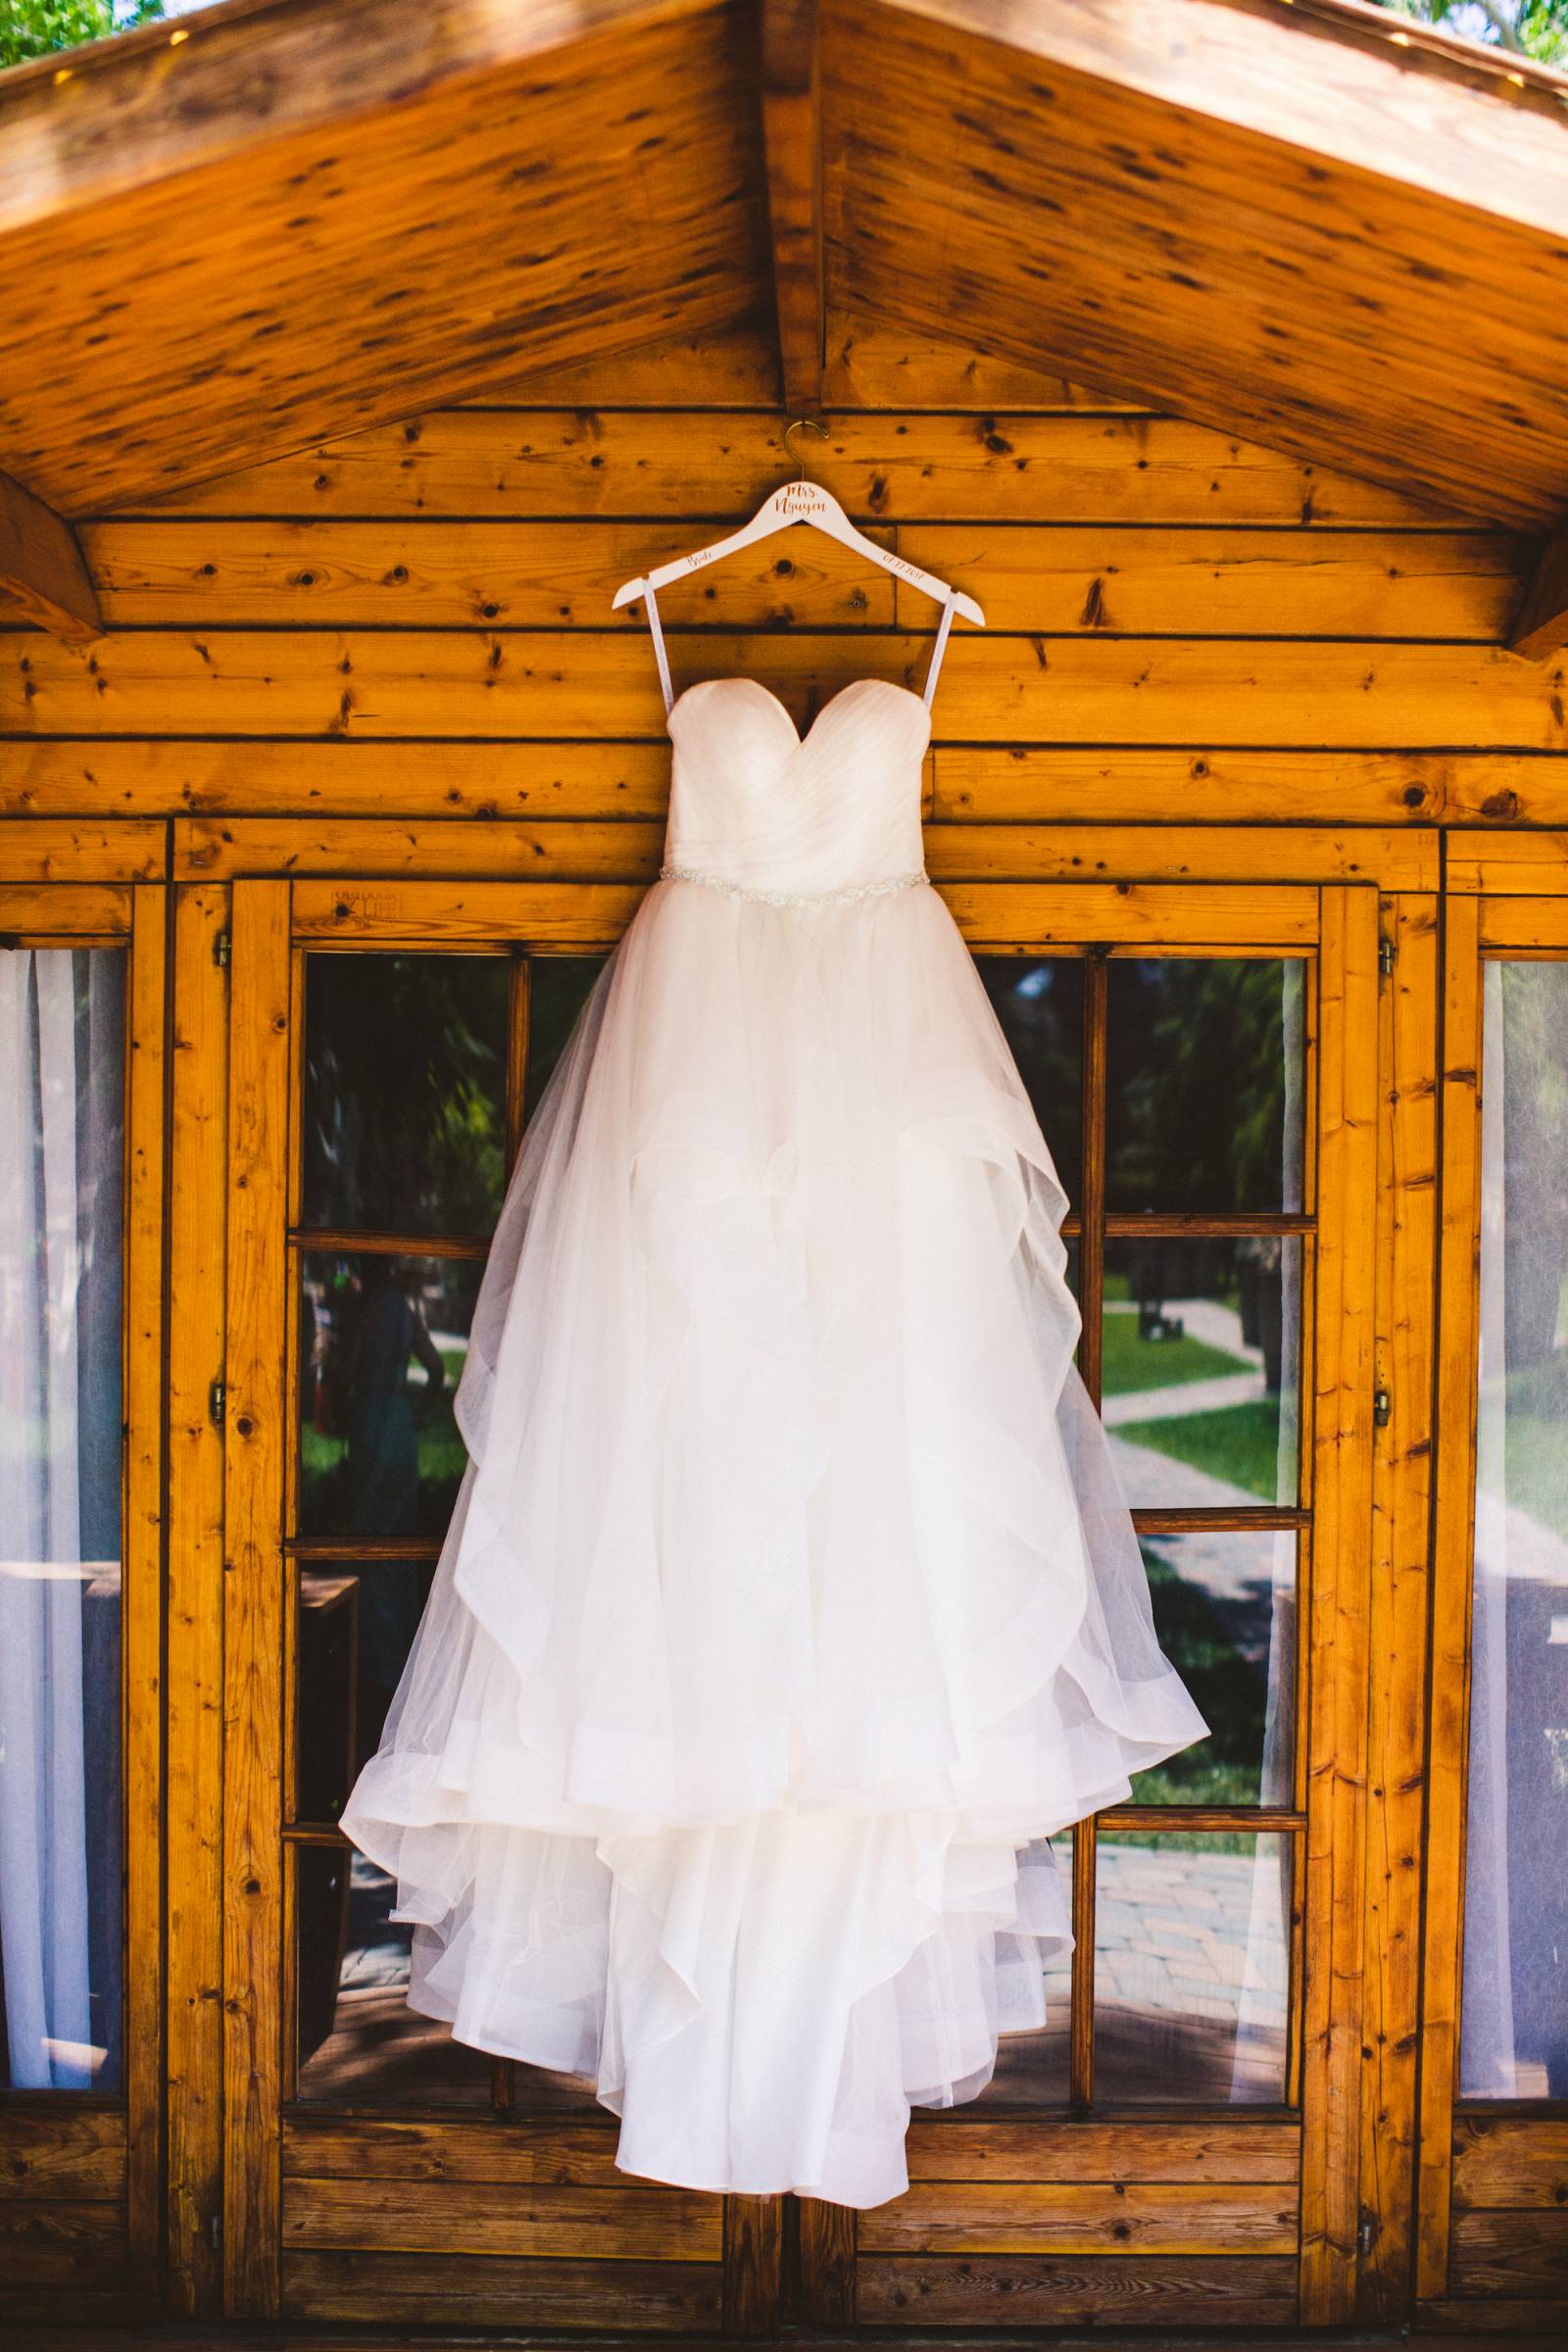 A Classic Bride's Dress - Adventure Inspired Weding | The Wedding Standard